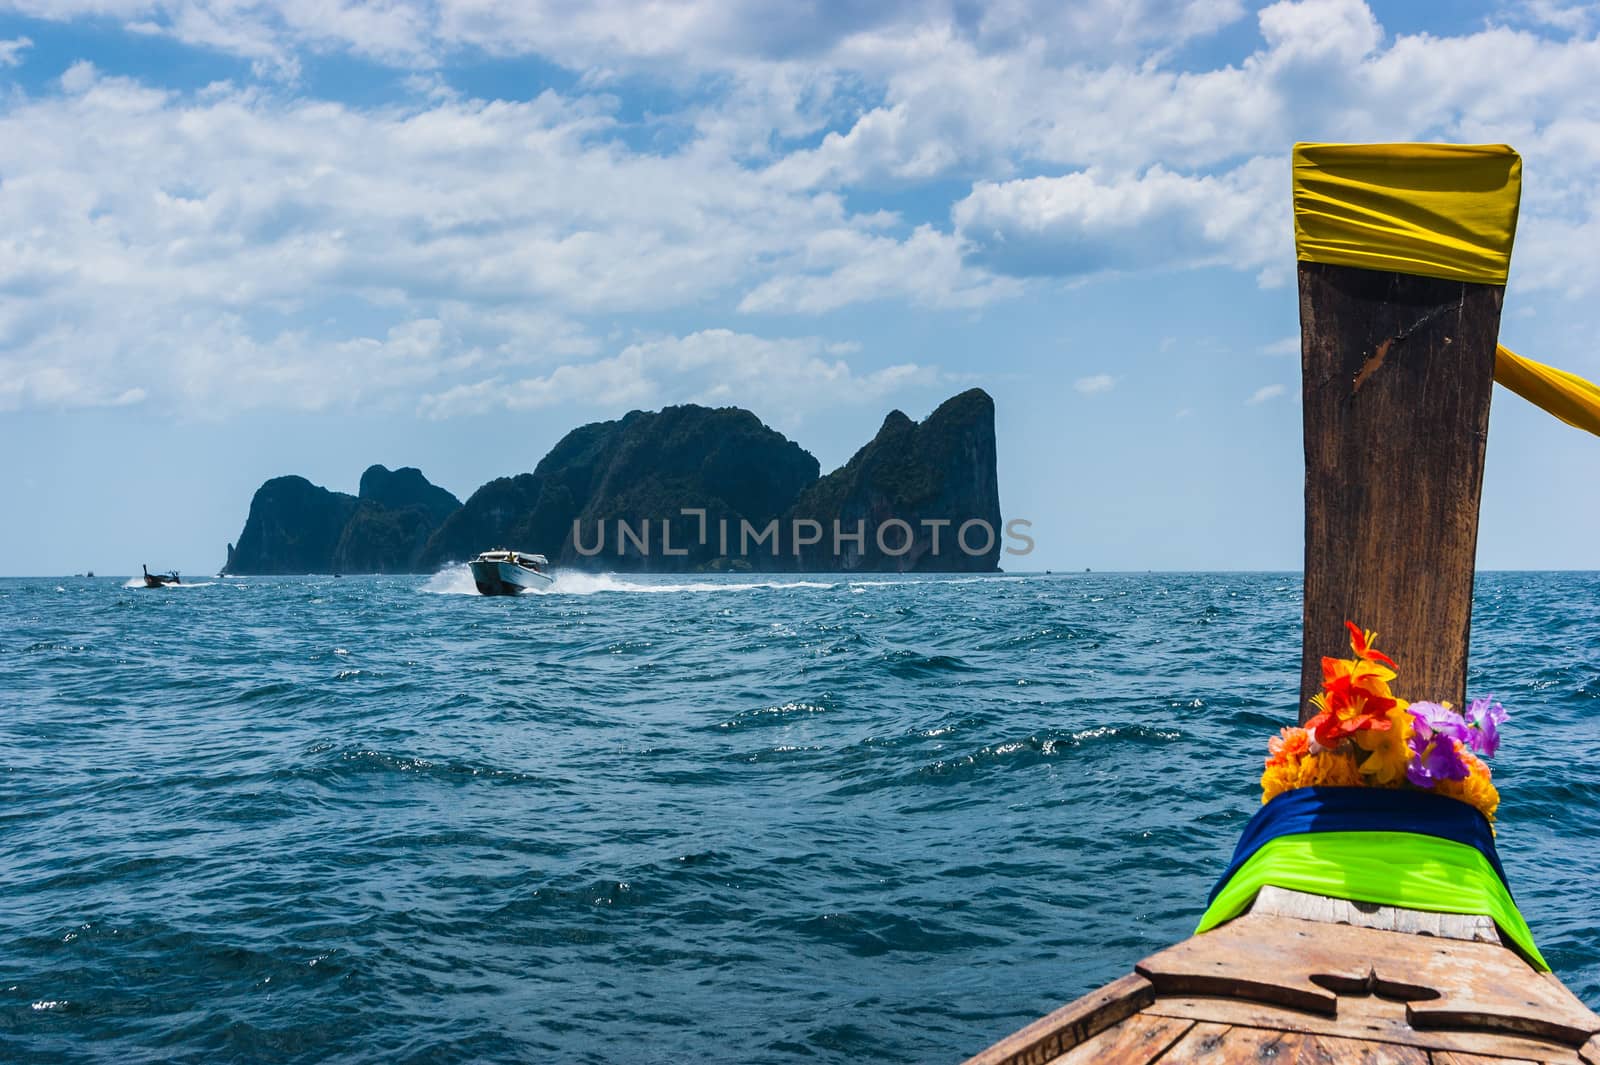 Boats at sea against the rocks in Thailand by oleg_zhukov